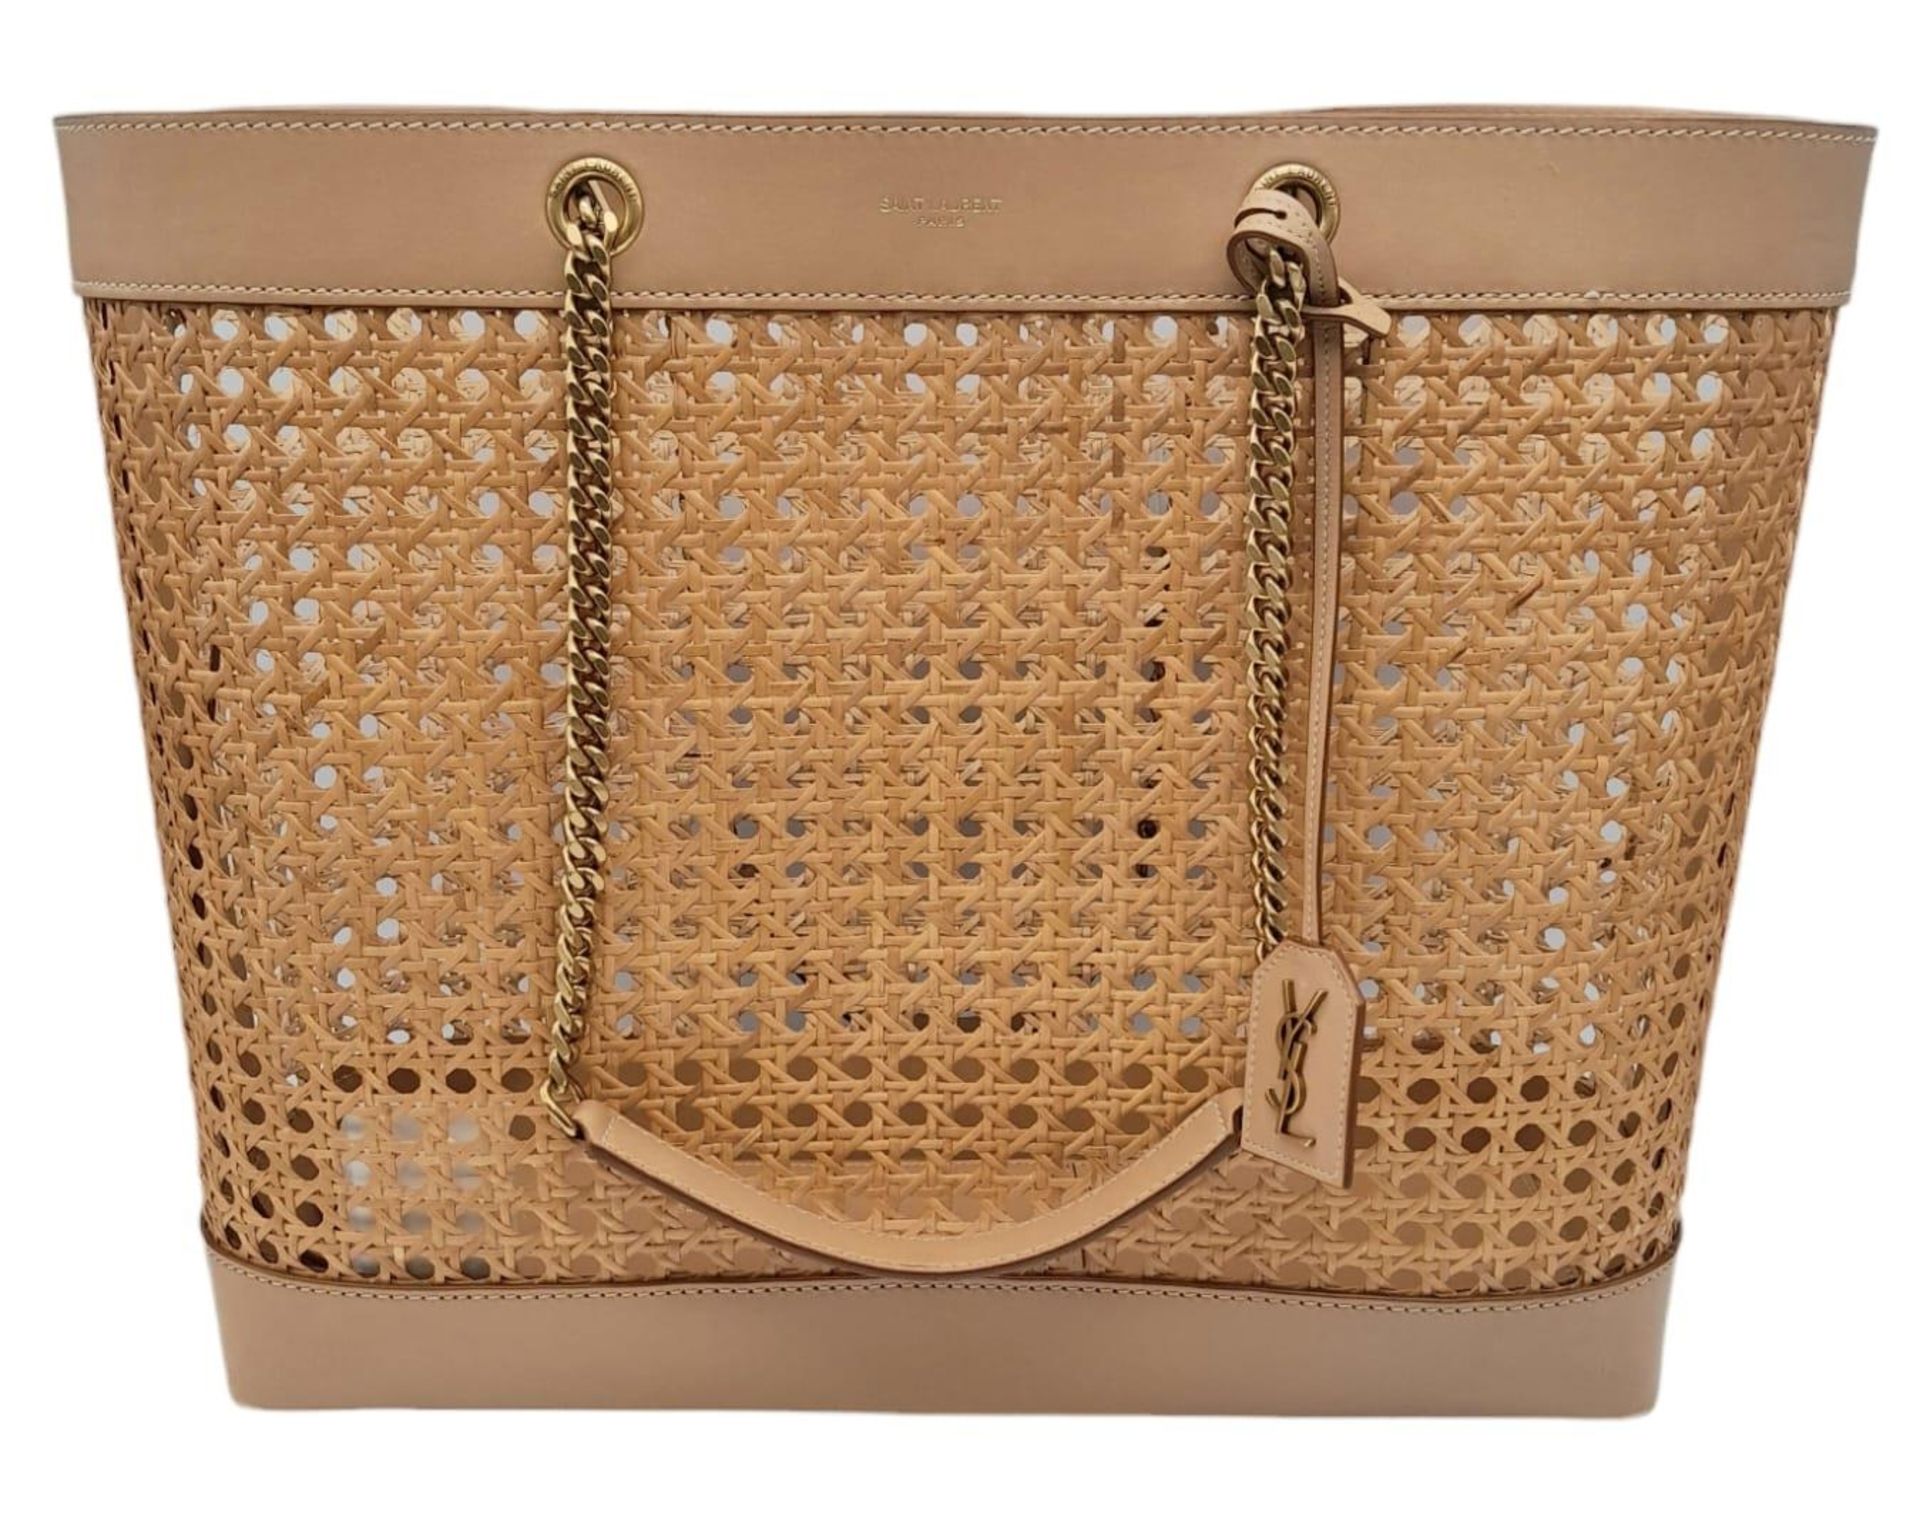 A Saint Laurent Beige Tote Bag. Woven rattan and leather trim exterior. Magnetic closure, gold-toned